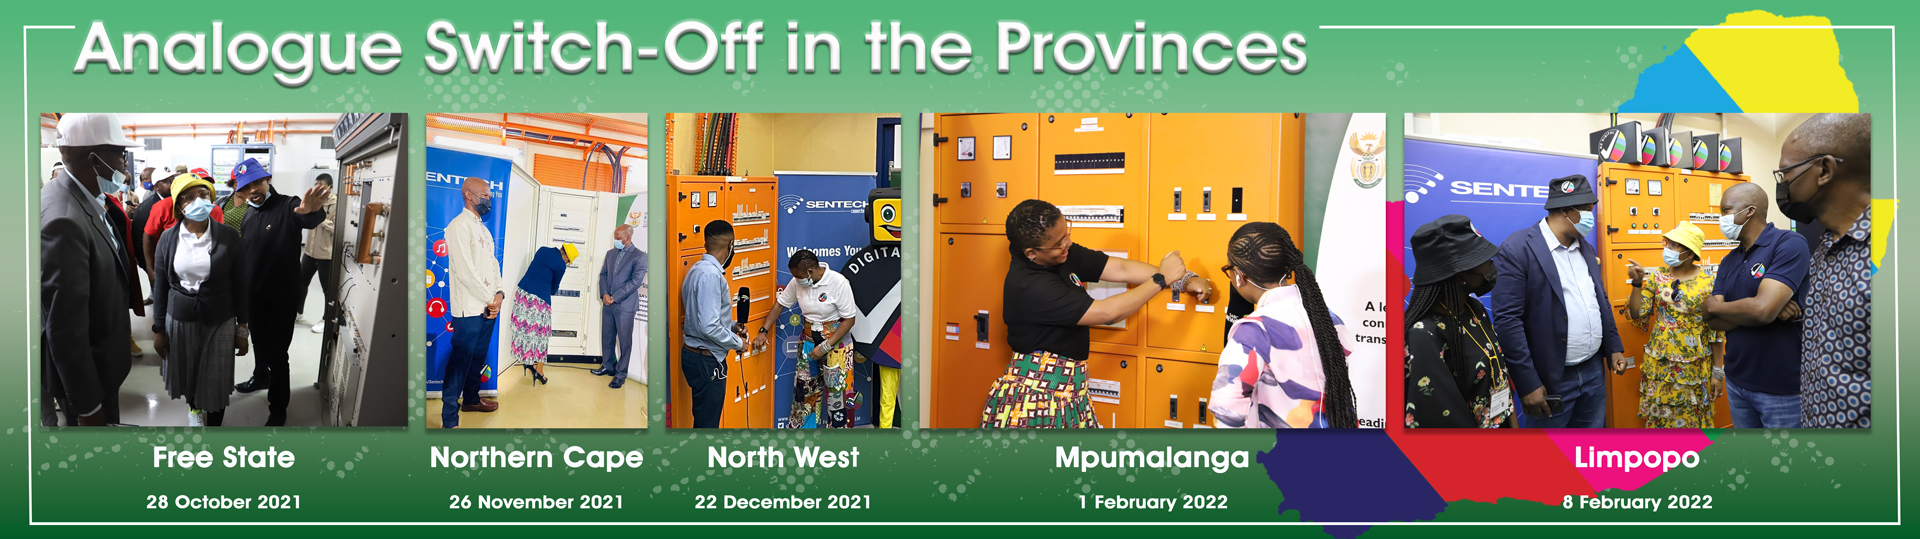 Analogue switch-off in Provinces